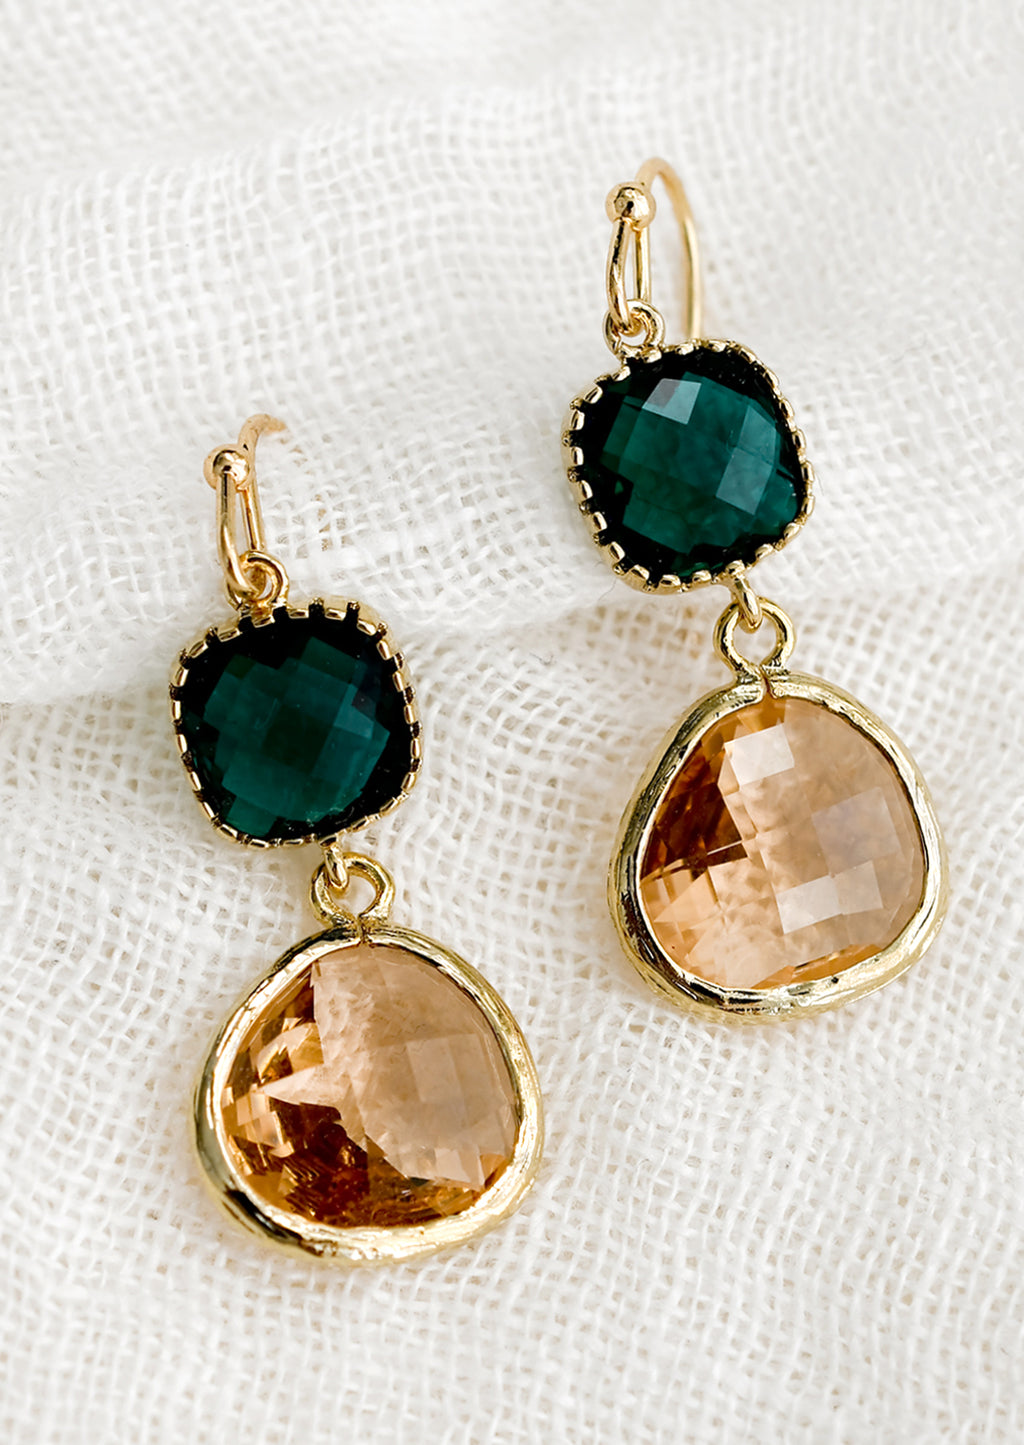 Emerald / Peach: A pair of two-stone bezeled gem earrings in emerald and blush.